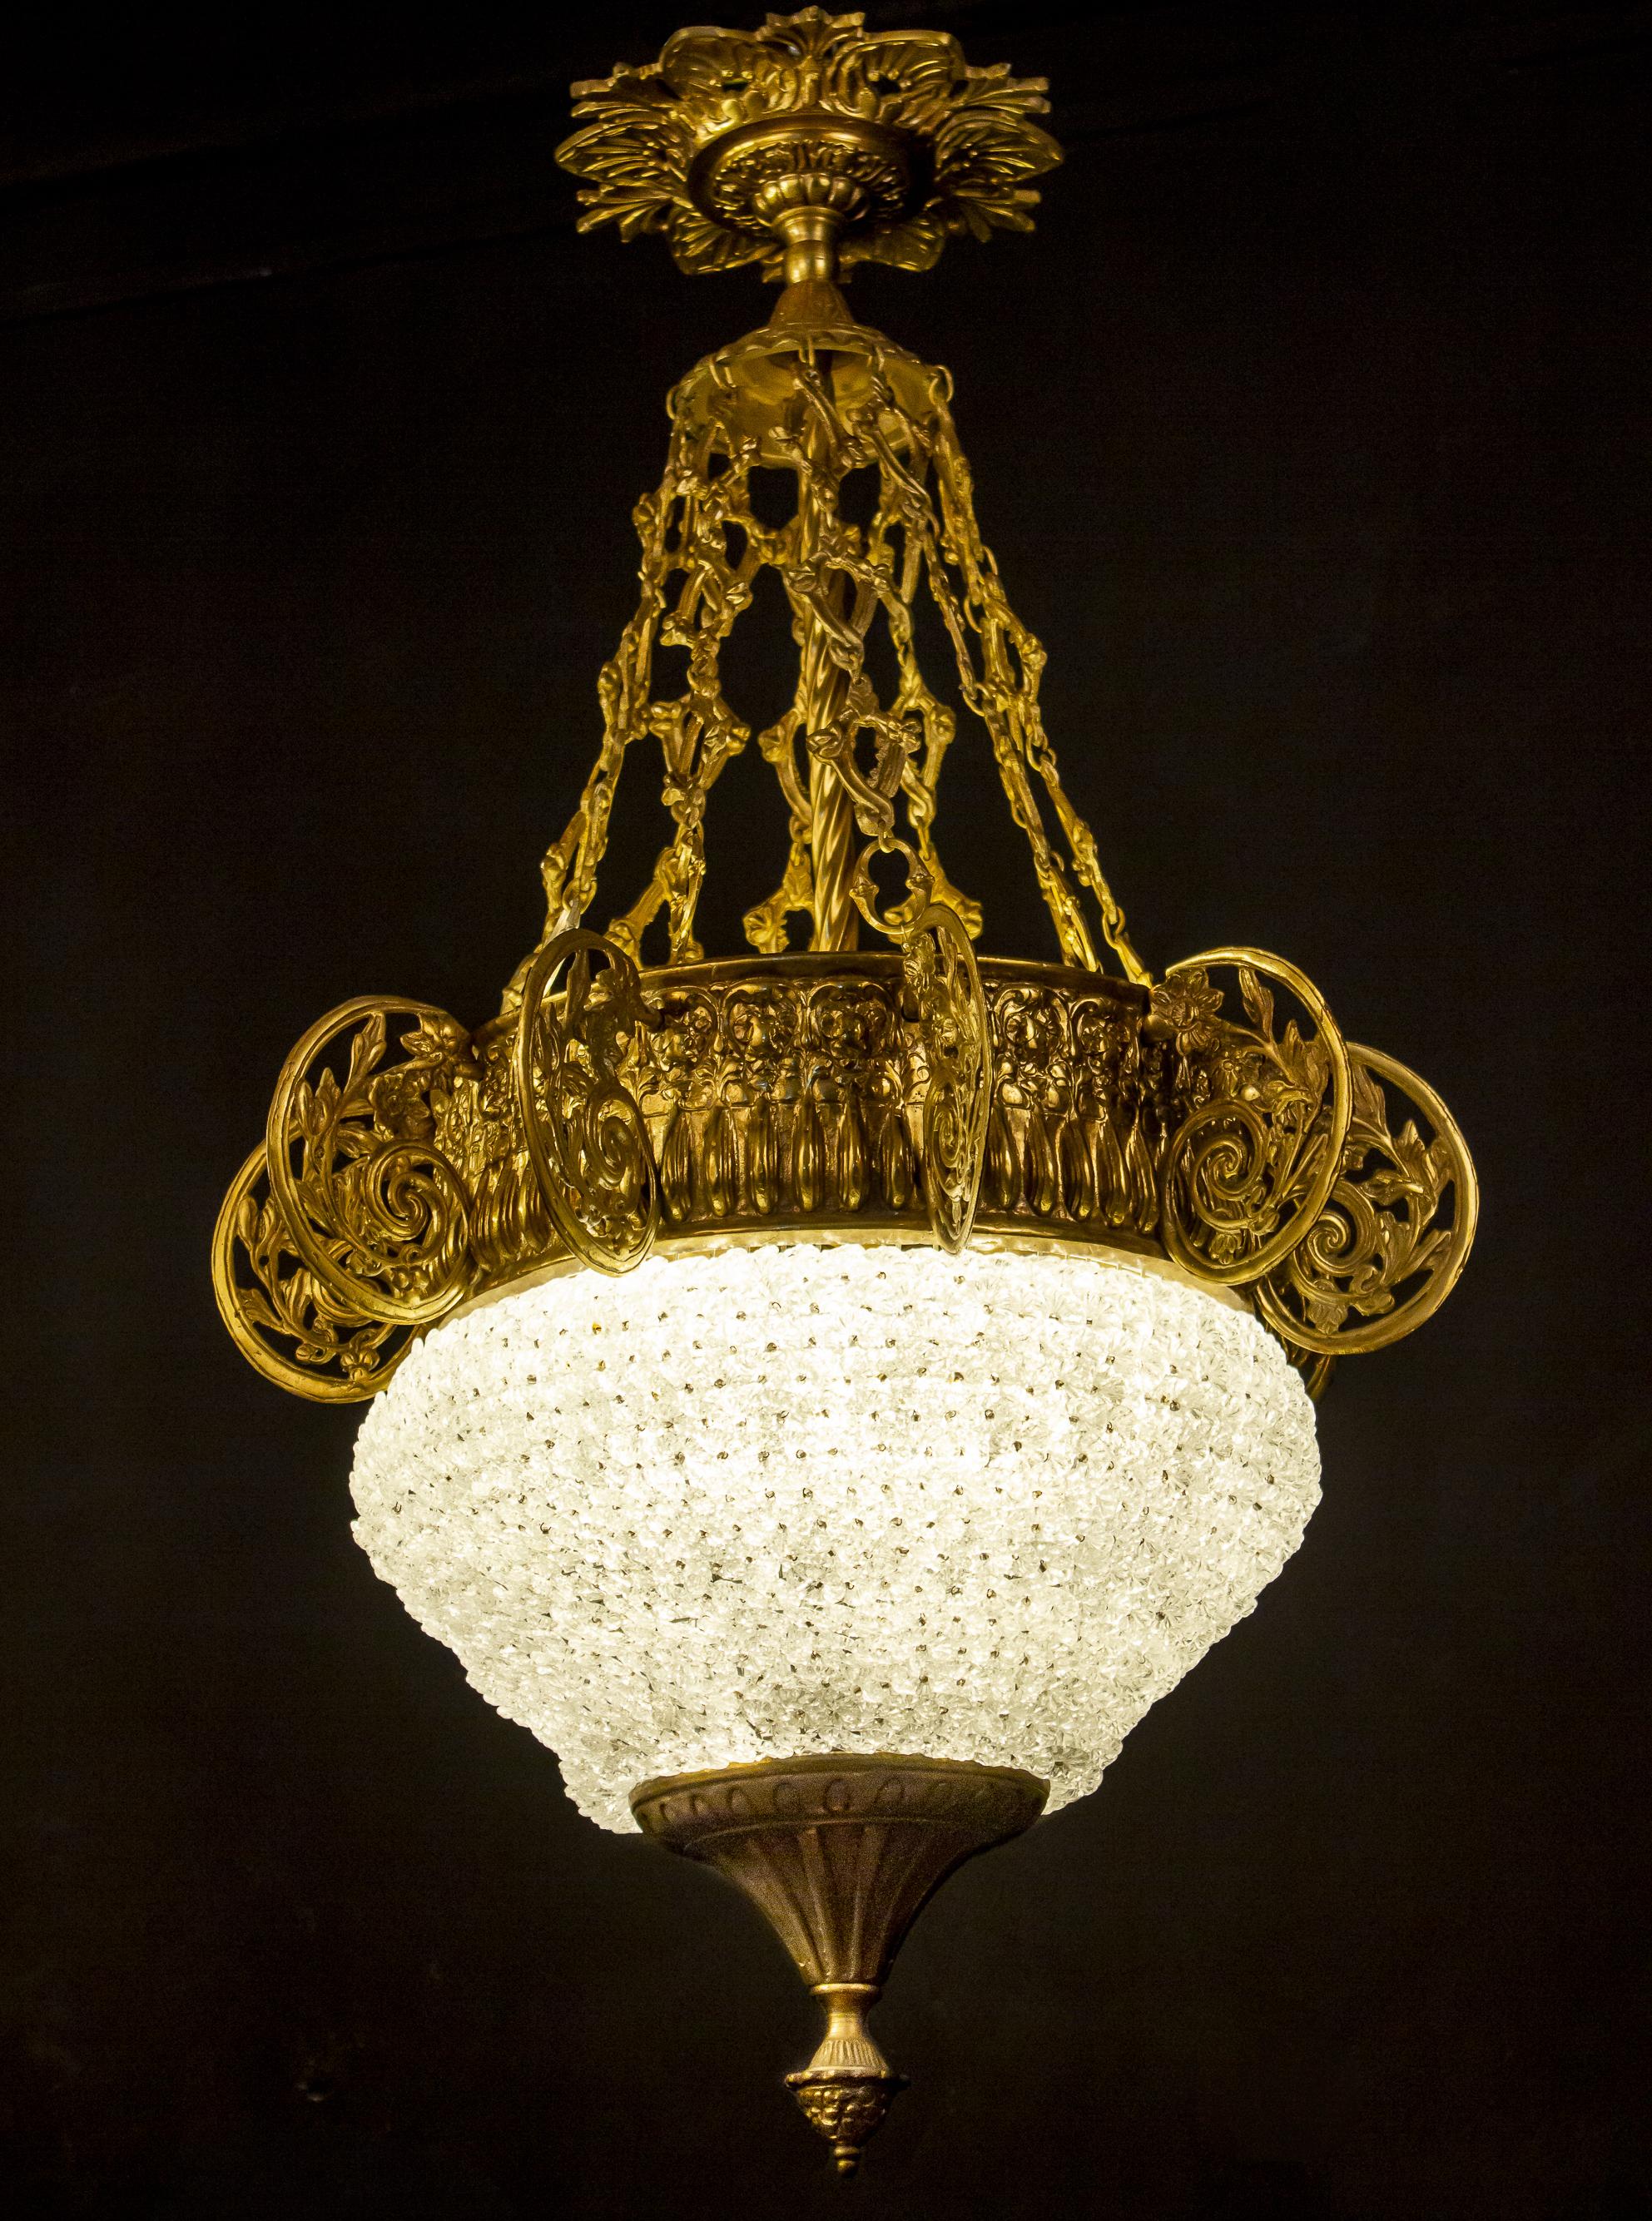 Highly decorative Ormolu mounted art deco chandelier, centered by hundreds of delicious small hand blown murano glass flowers. Beautiful scrolled ormolu elements and chain terminating in a finely decorated canopy.
Six E27 light bulbs suitable for